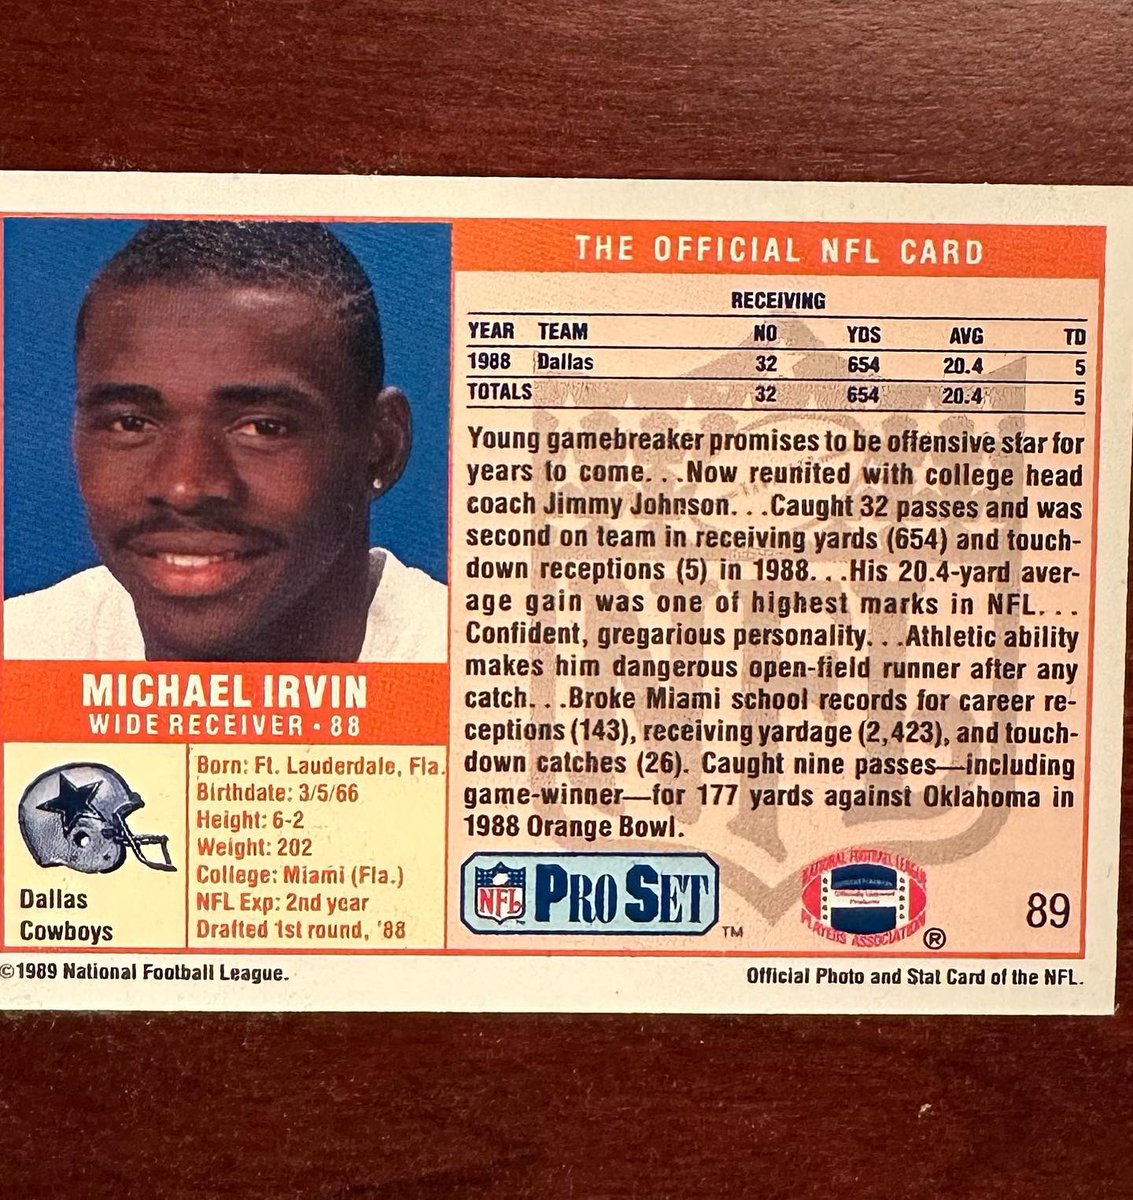 1989 Pro Set Michael Irvin Rookie Card. 49’ers fan growing up but man those Cowboys were something else! Irvin was an absolute beast. #junkwax #michaelirvin #footballcards #cards #footballcard #card #rookiecard #sportscards #sportscard #cowboys #dallascowboys #cardcollector